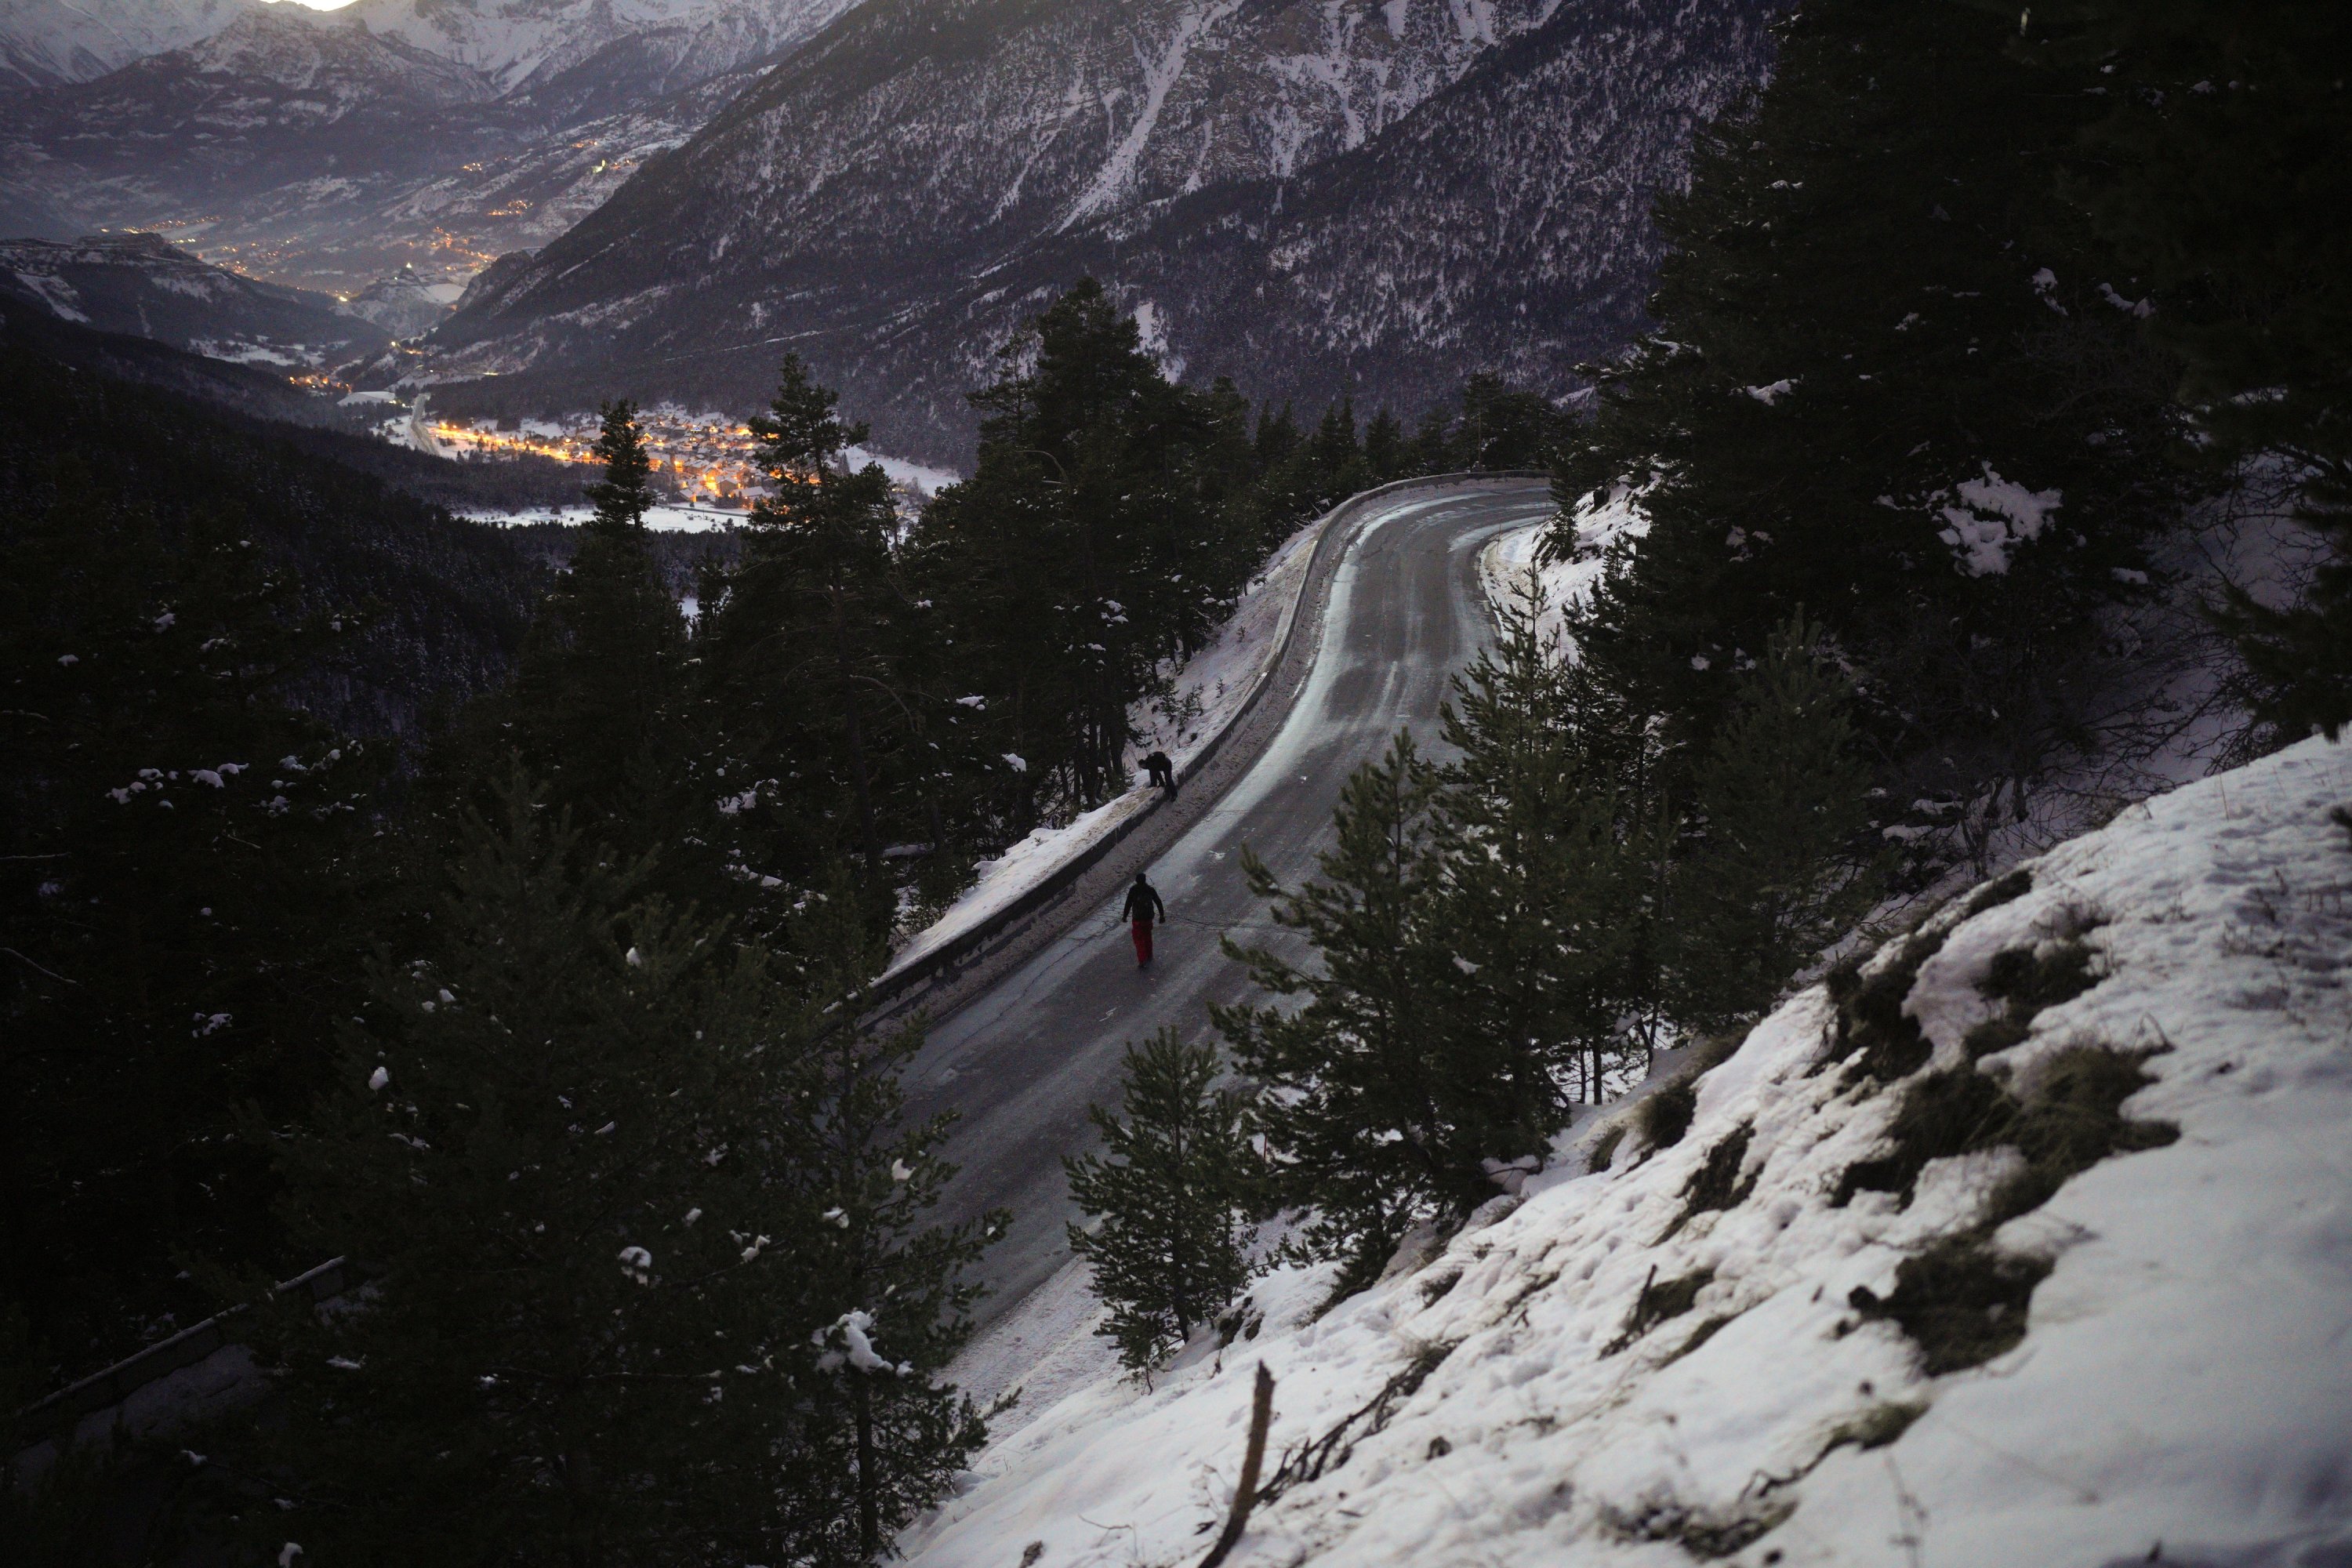 Afghan migrants Ali Rezaie and Sayed Hamza cross a mountain road in the French-Italian Alps to reach a migrant refuge in Briancon, France, Dec. 12, 2021.  (AP Photo)